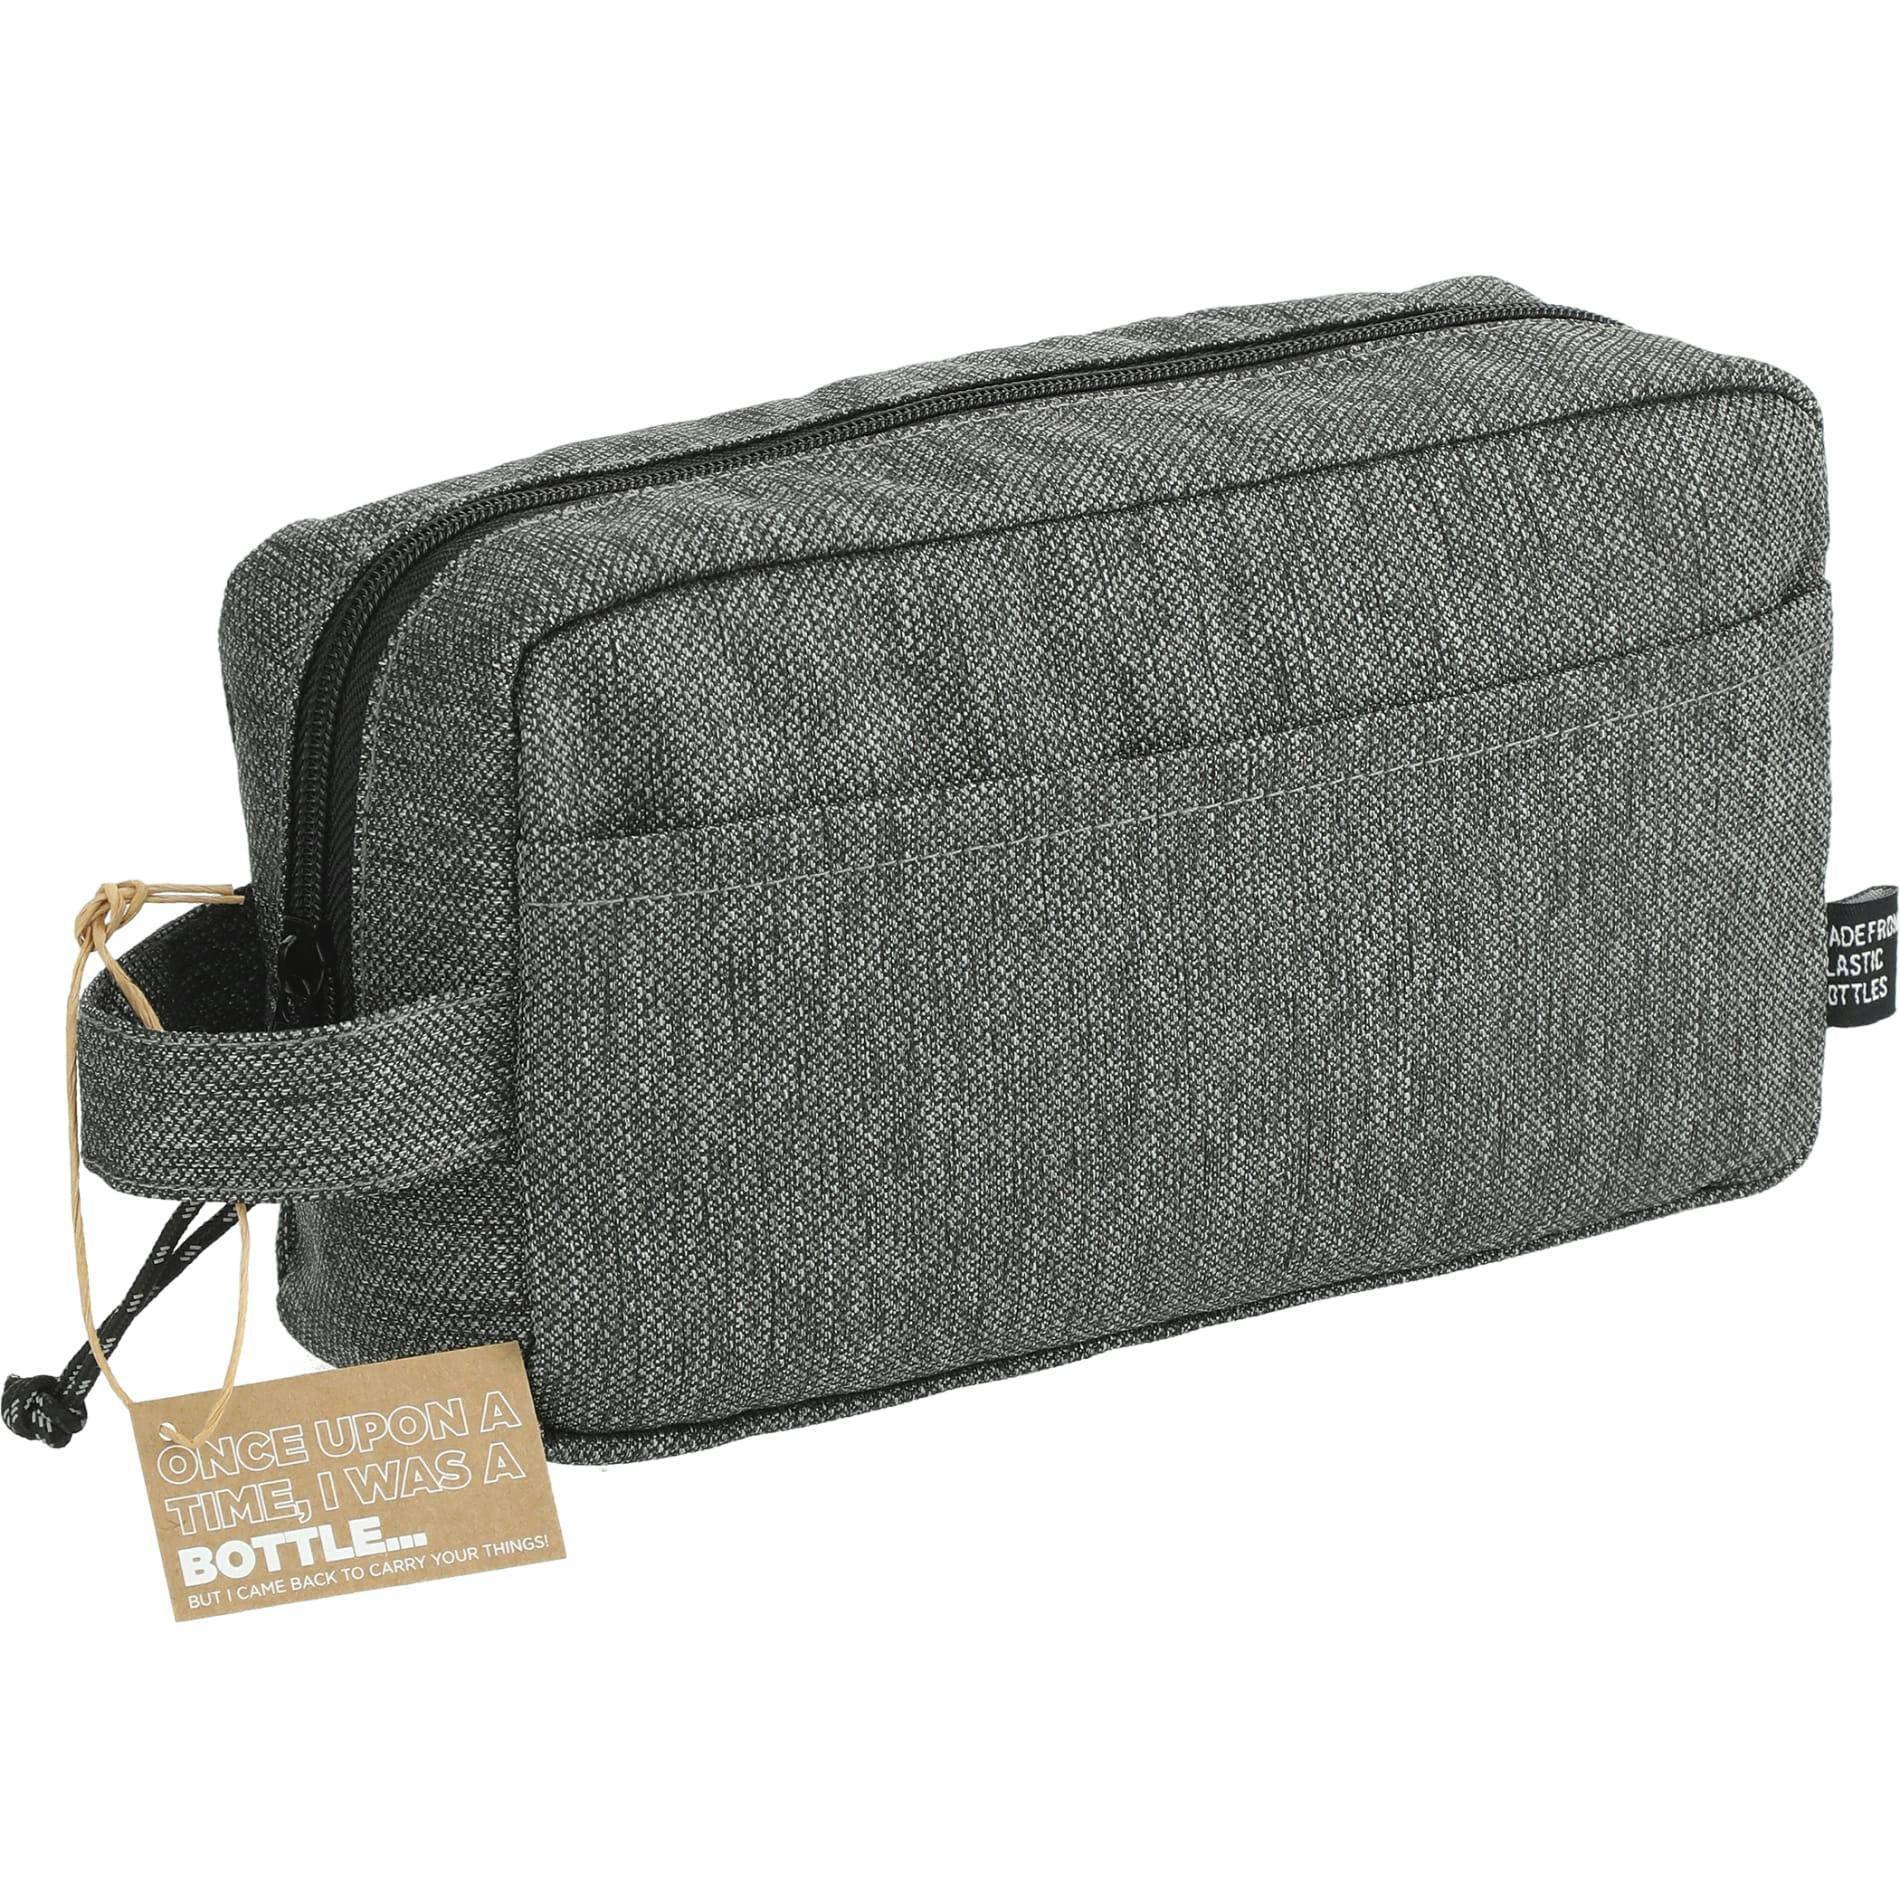 Vila Recycled Dopp Kit Pouch - additional Image 3